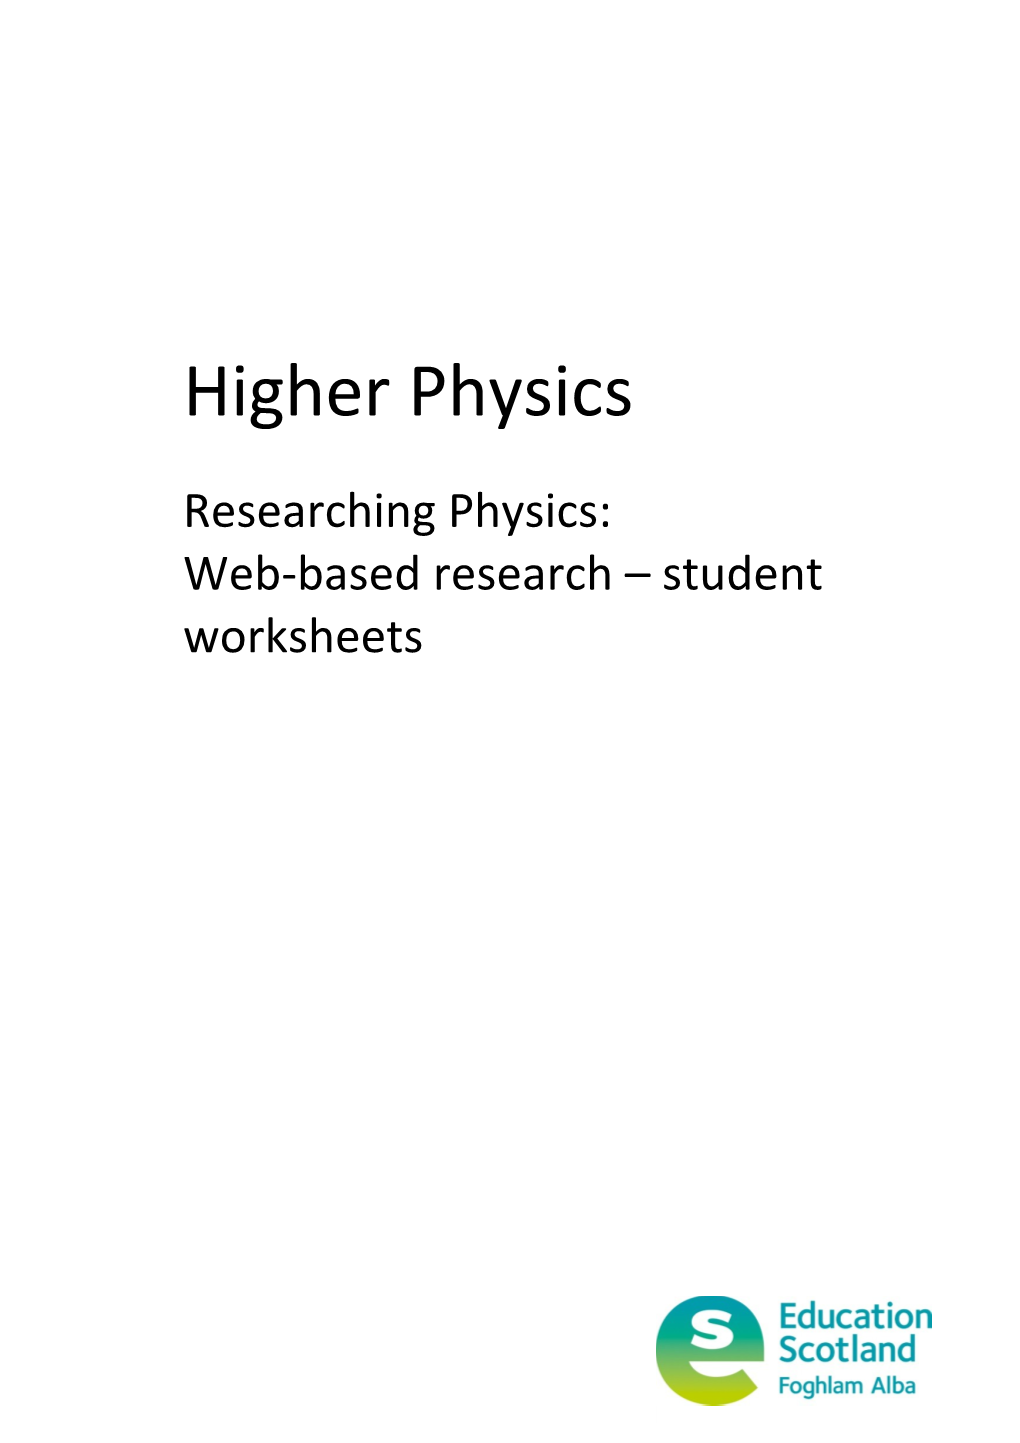 Higher Physics - Researching Physics: Web-Based Research - Student Worksheets